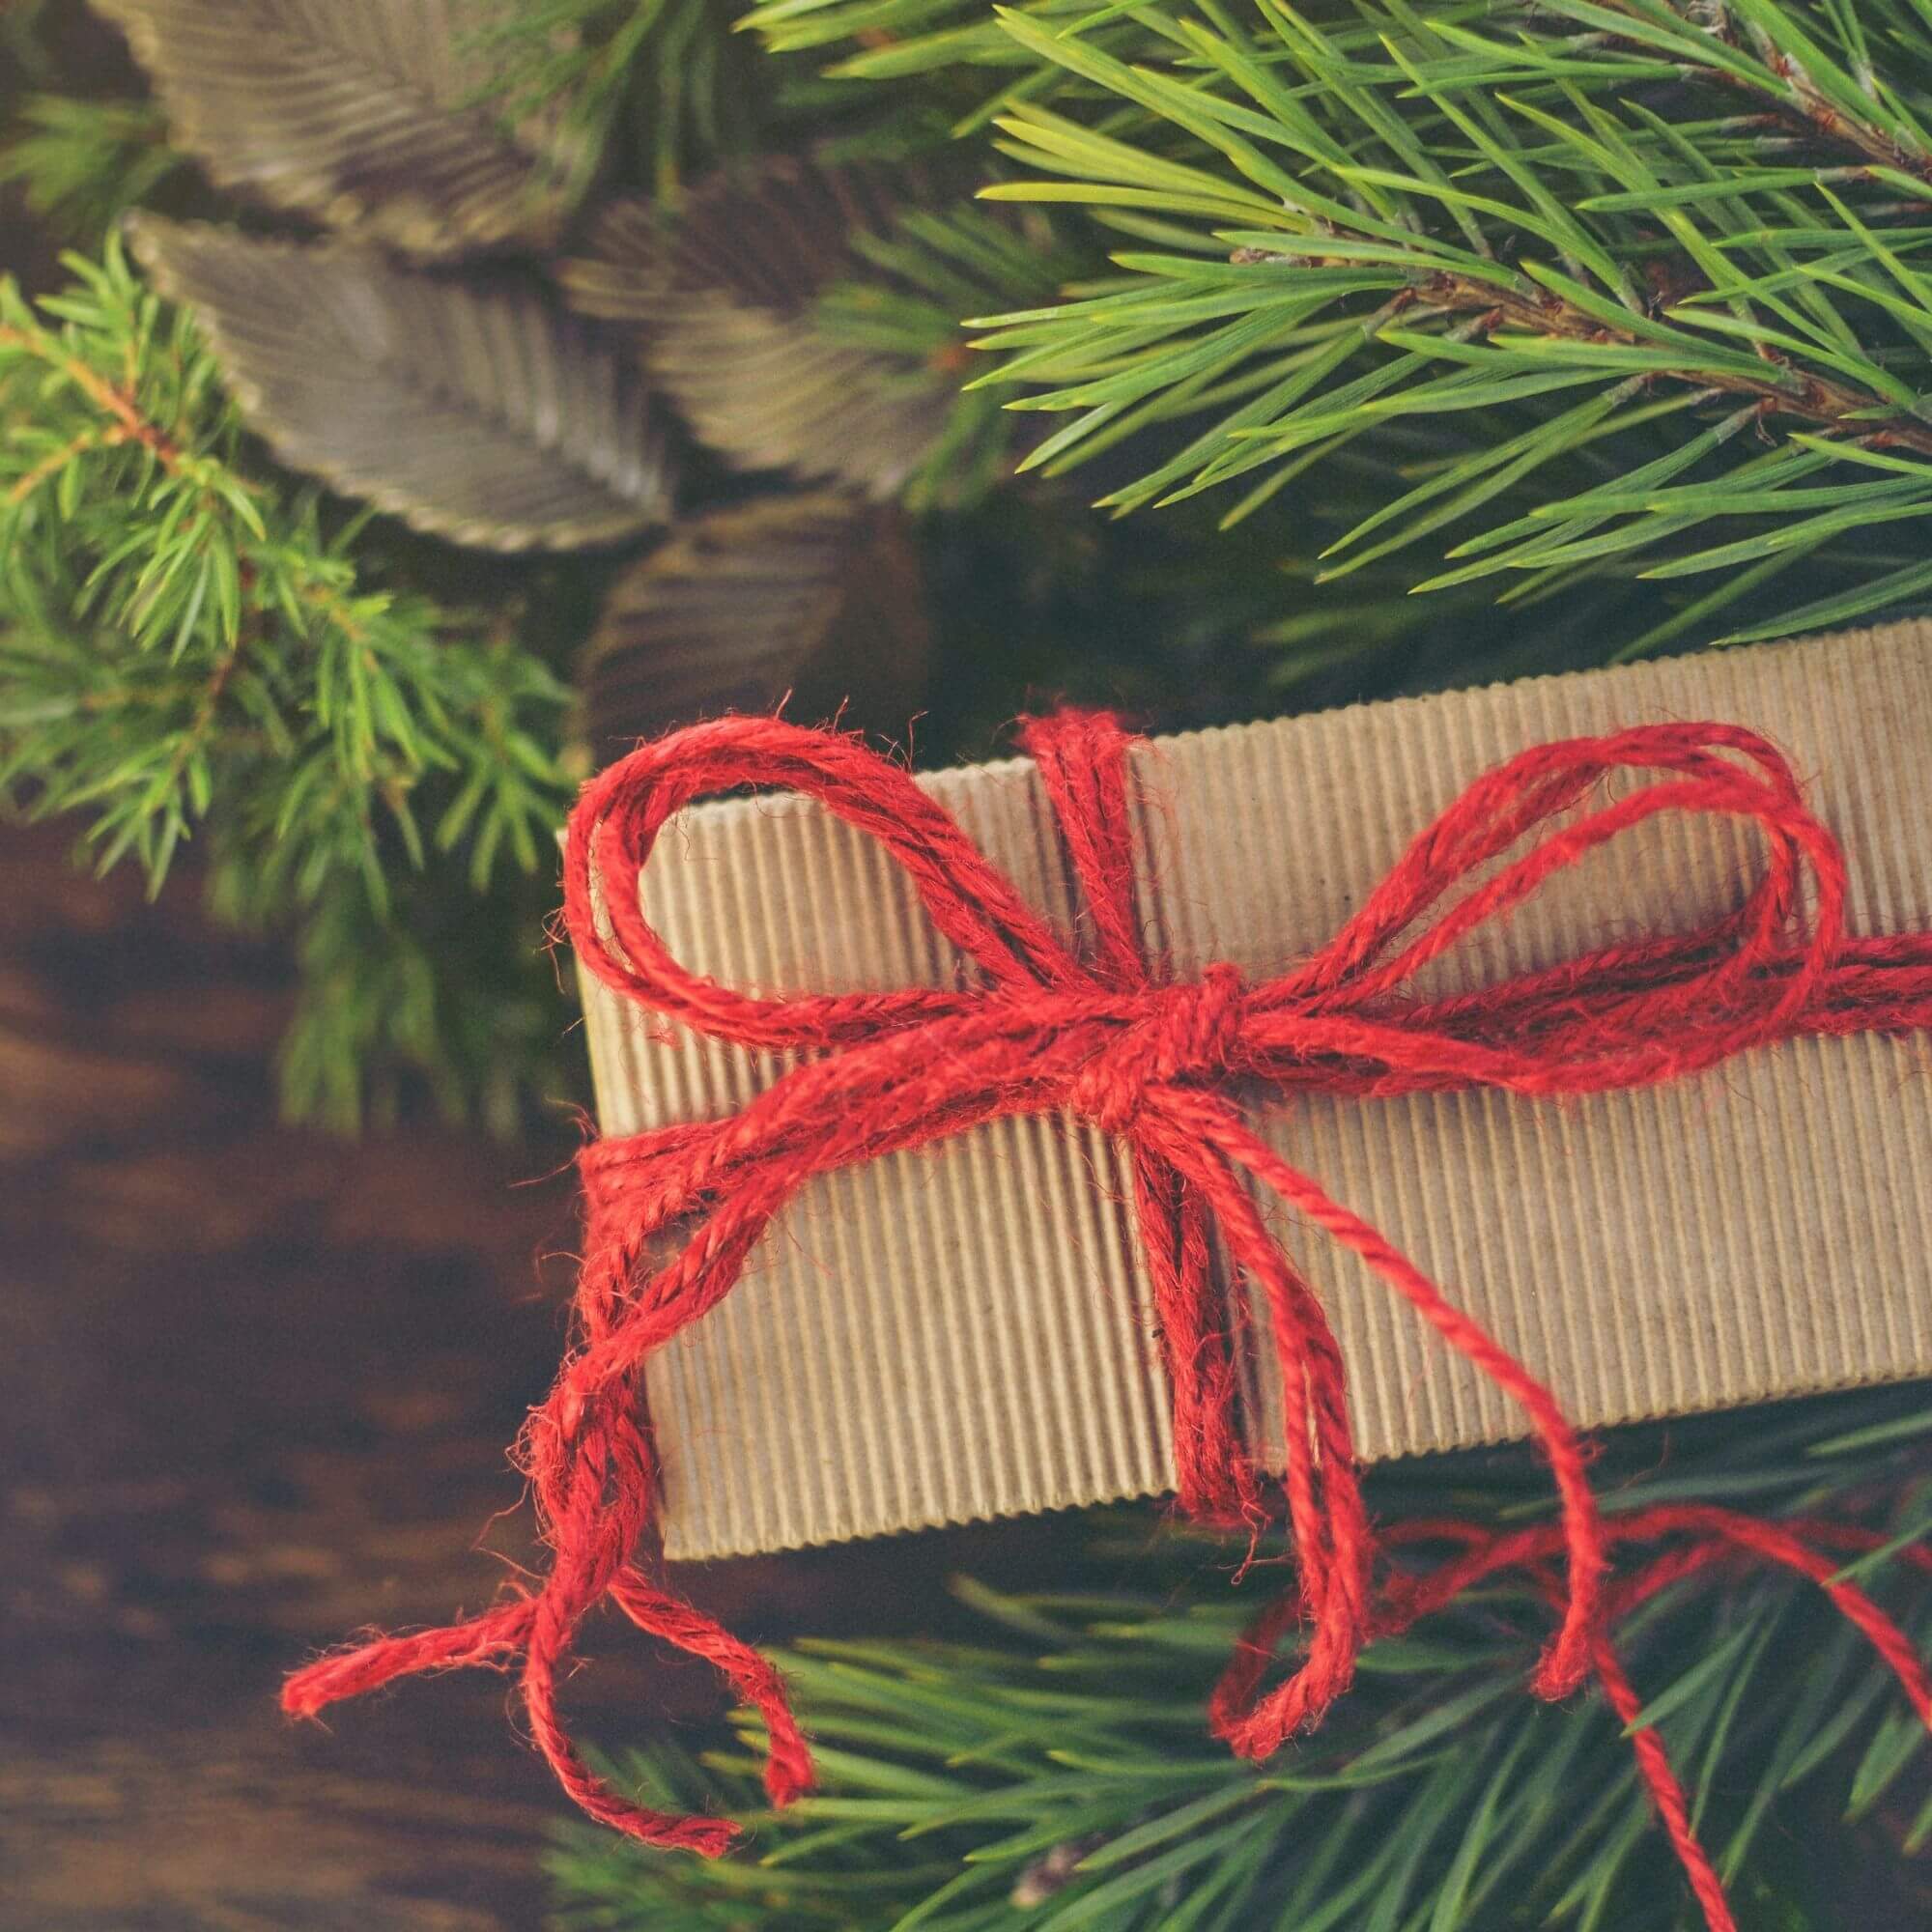 A Christmas gift wrapped in brown paper and red ribbon underneath a Christmas tree